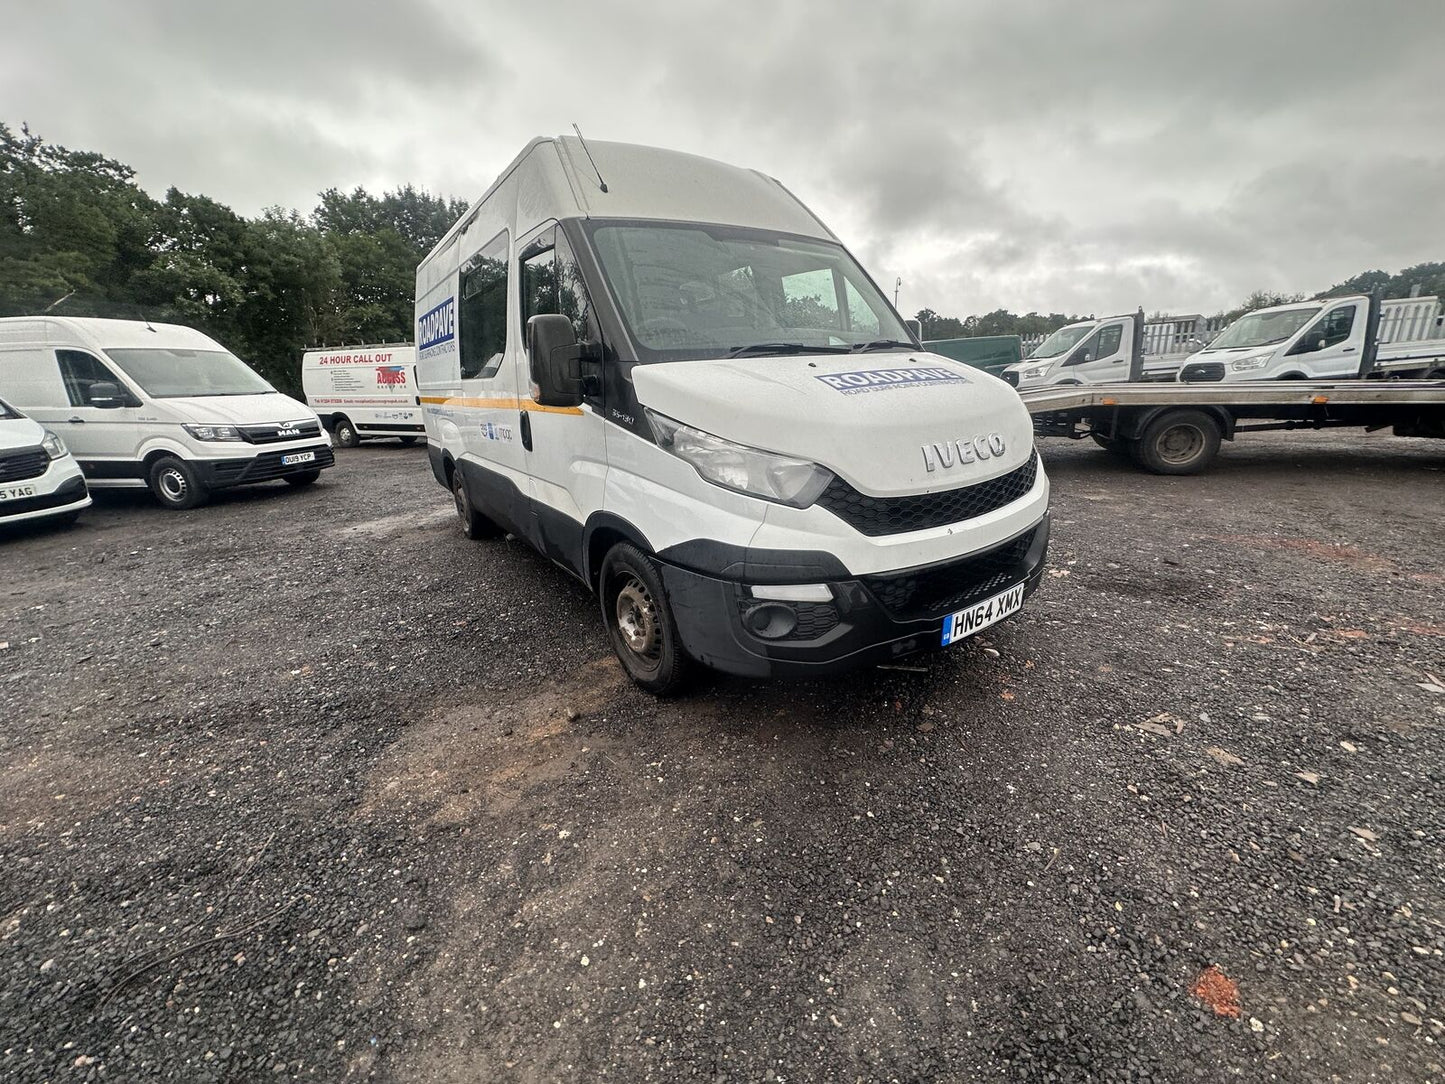 Bid on BARGAIN! 2015 IVECO DAILY 35S13 MWB: YOUR ROAD TO A MOBILE RETREAT - ONLY 105K MILES- Buy &amp; Sell on Auction with EAMA Group